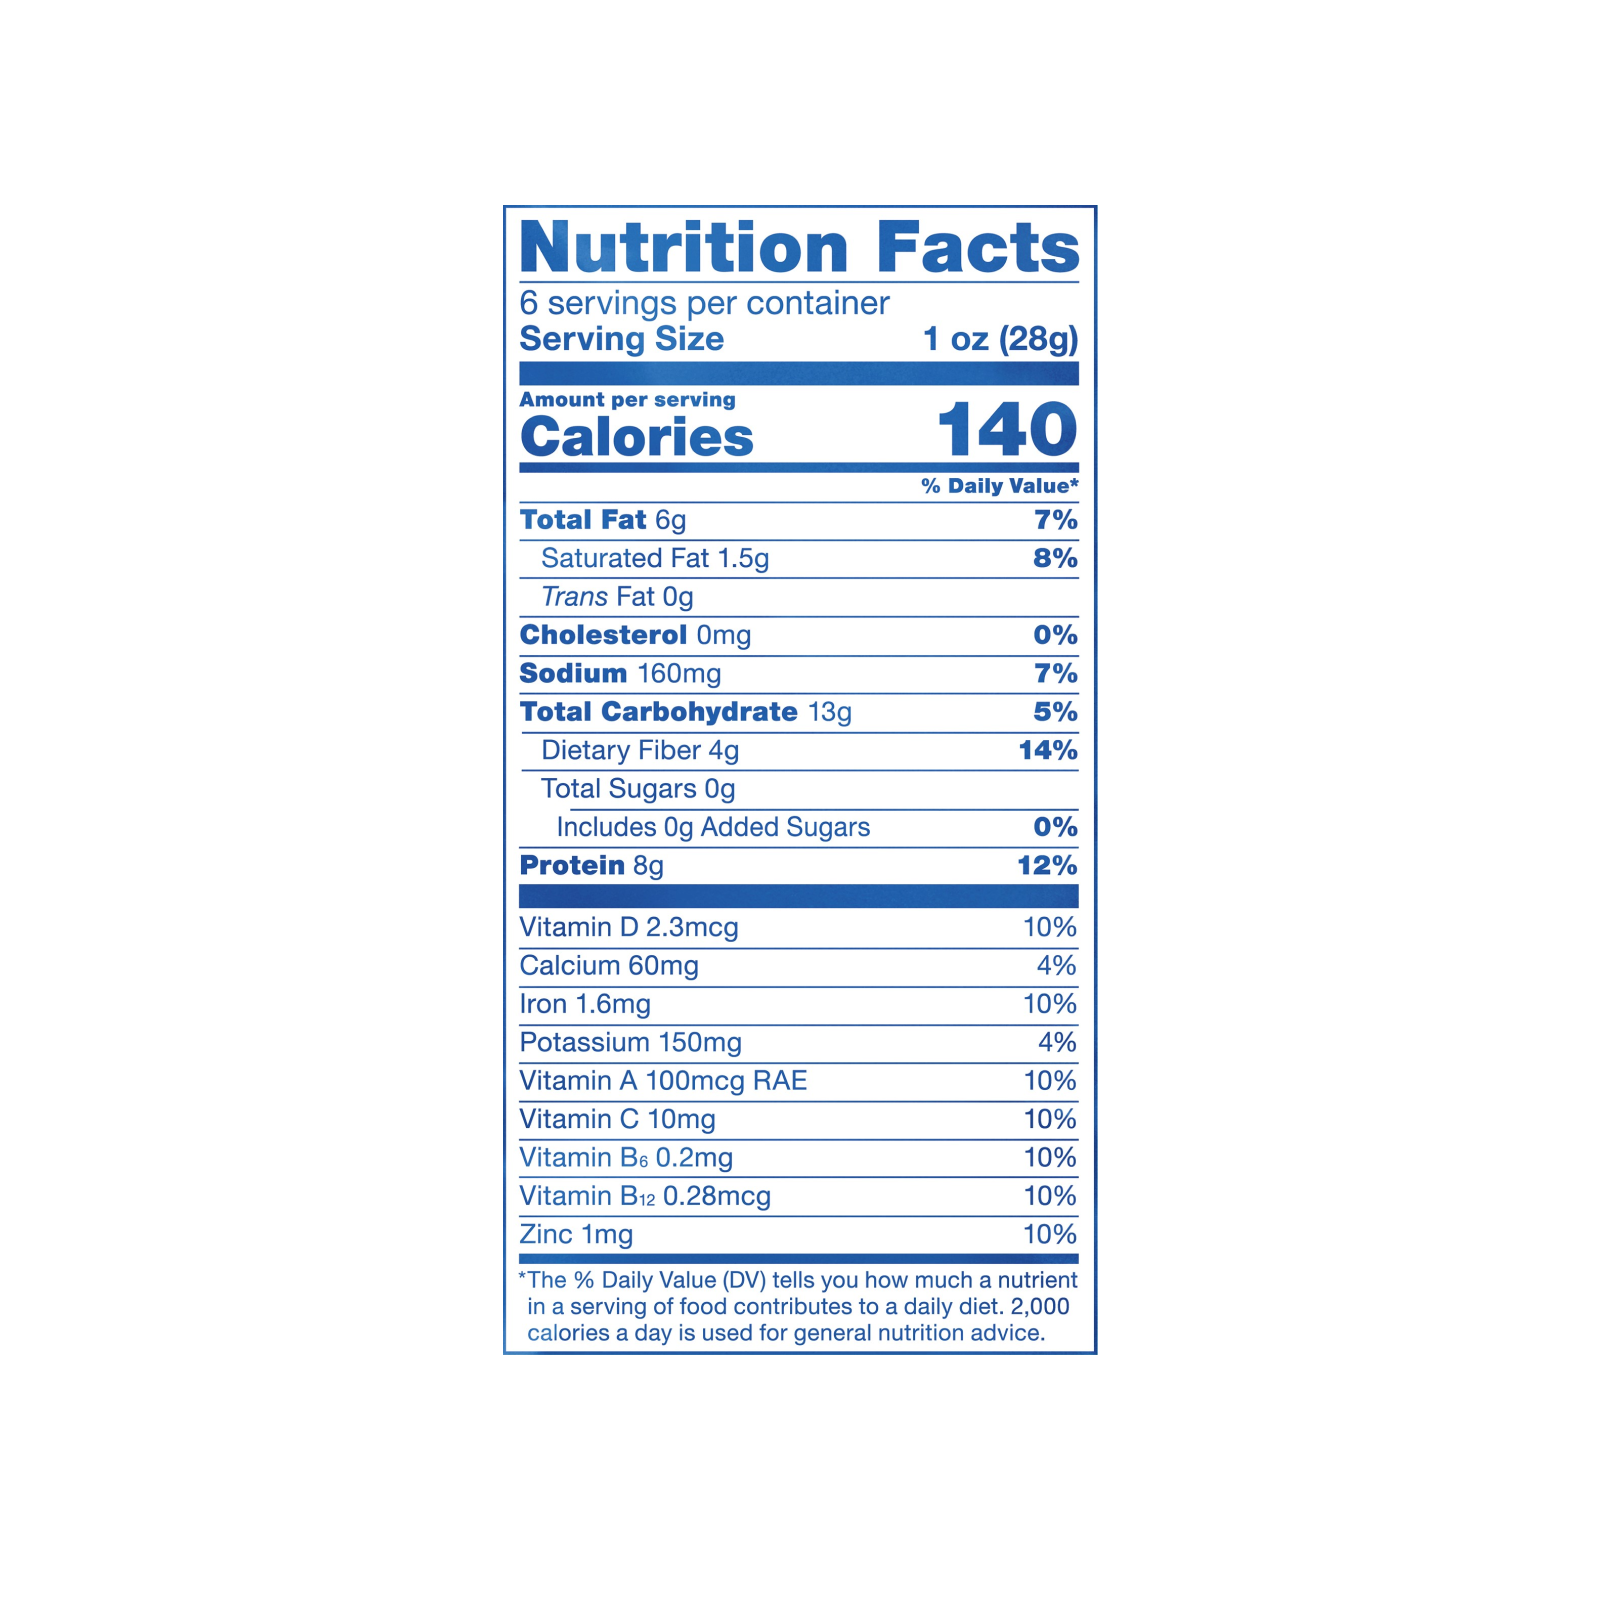 Extra Chedda' Mac Nutrition Facts- veggie snacks, gluten free and no added sugars